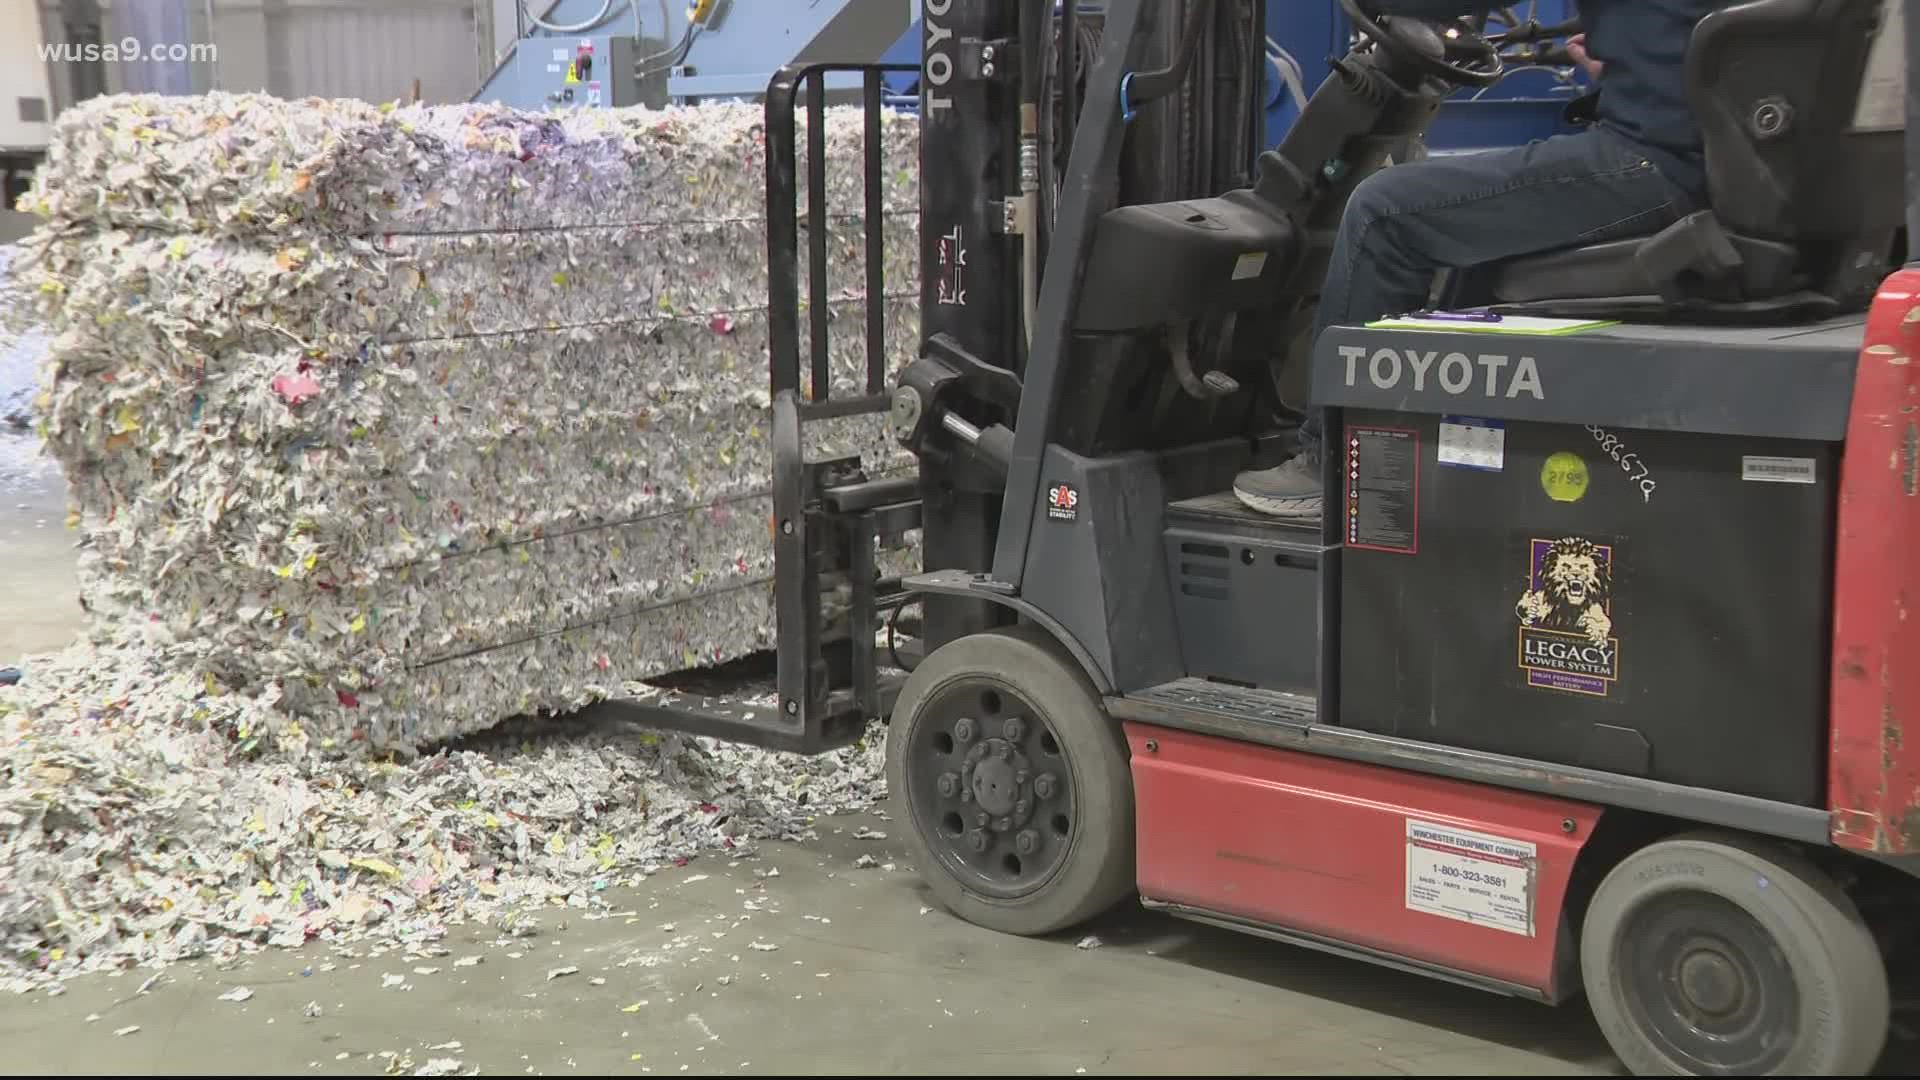 More than 95,000 pounds of electronics and 10 tons of paint were also recycled.